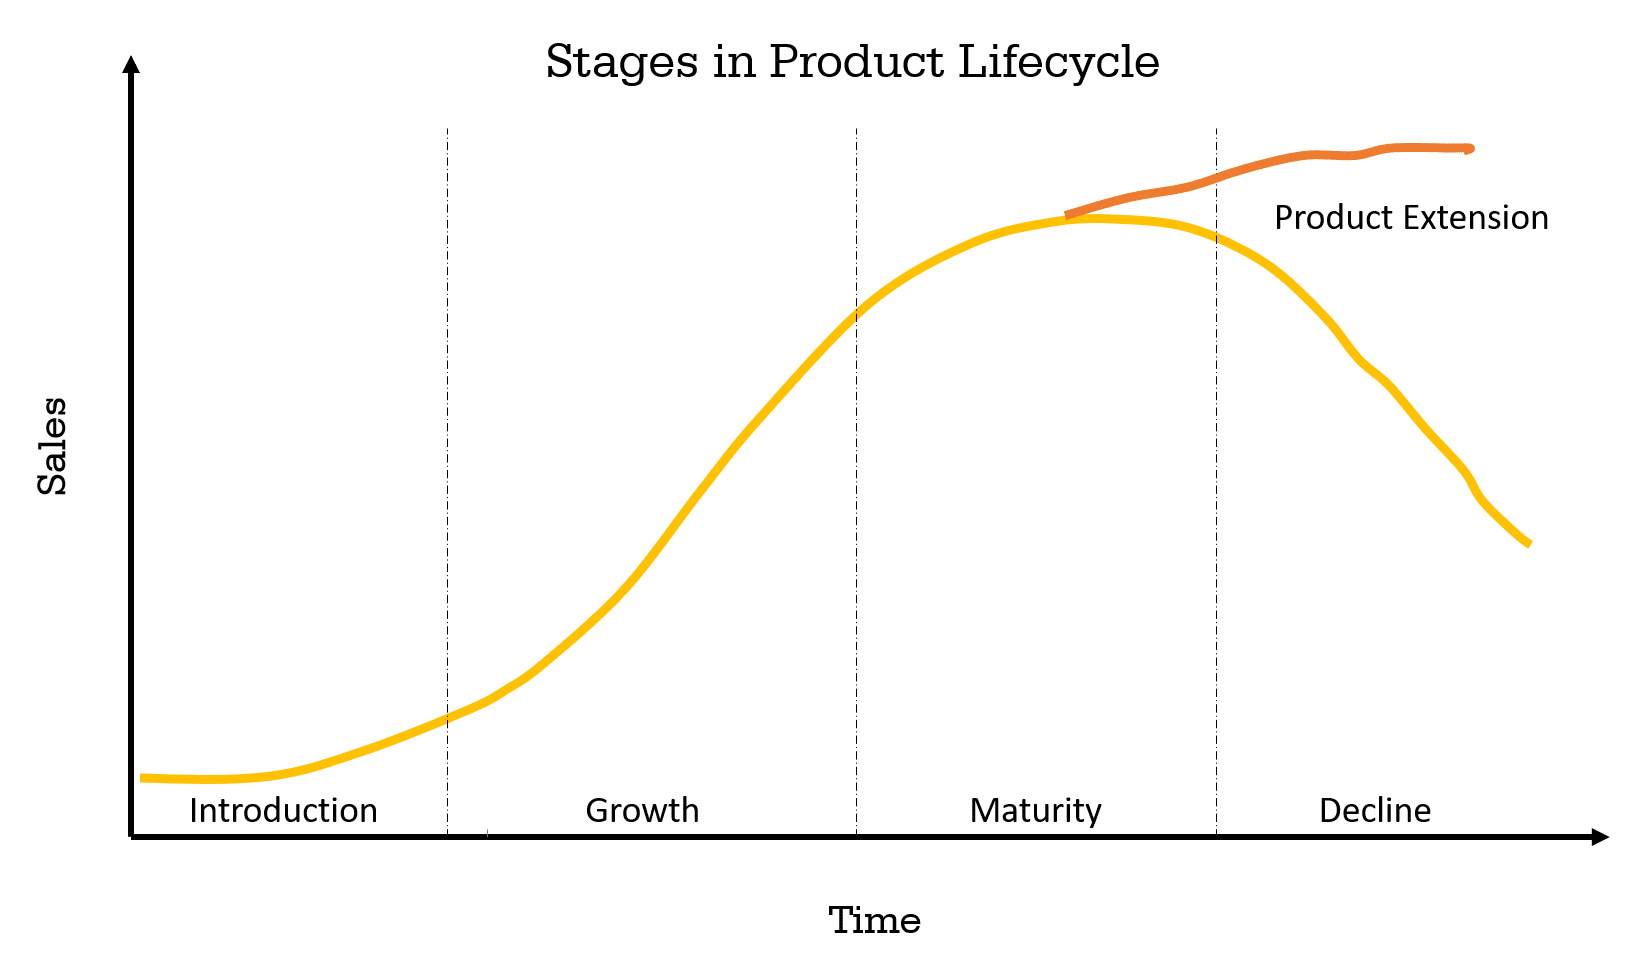 Graph of Stages in Product Lifecycle and Product Extension option